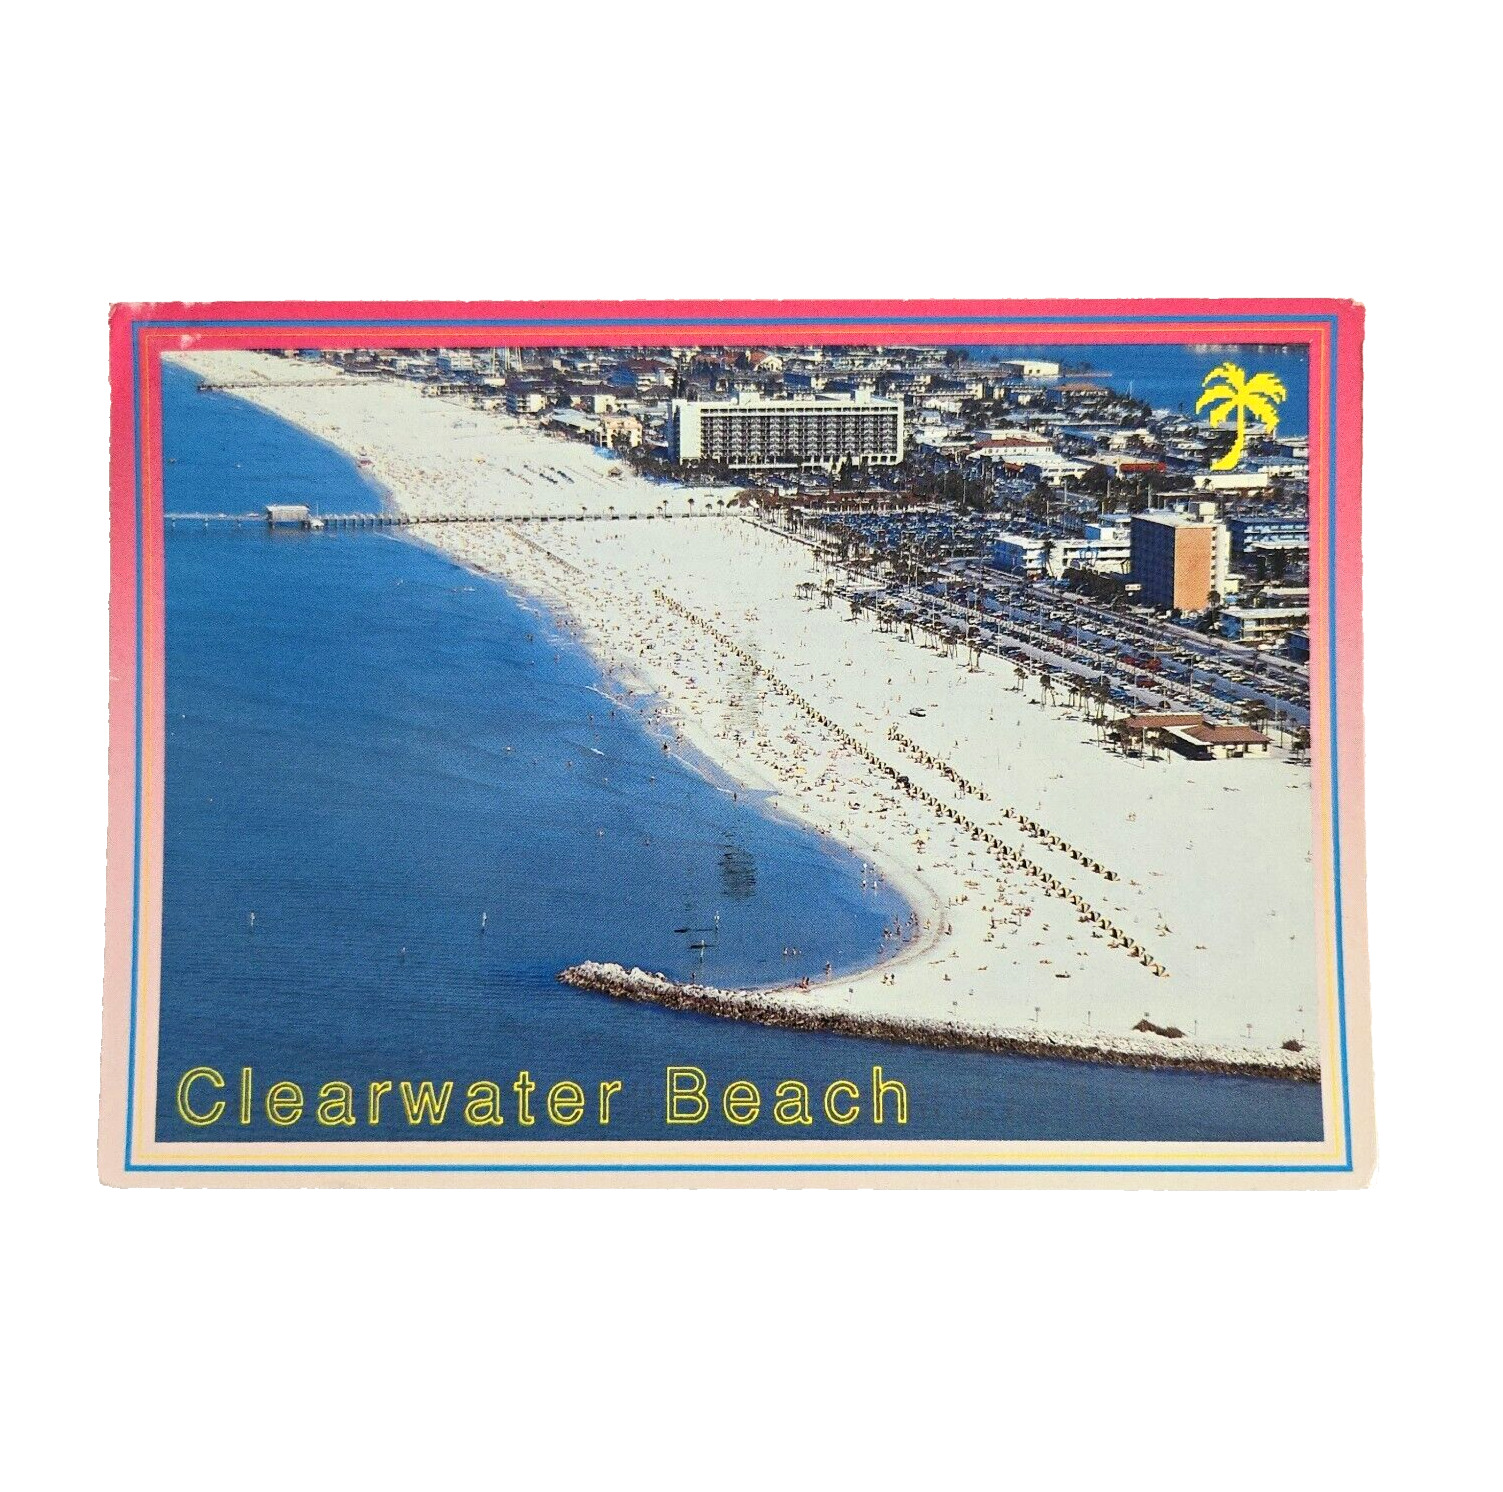 Clearwater Beach Vintage Postcard Tampa Florida Tropical Vacation Sunshine 1990s